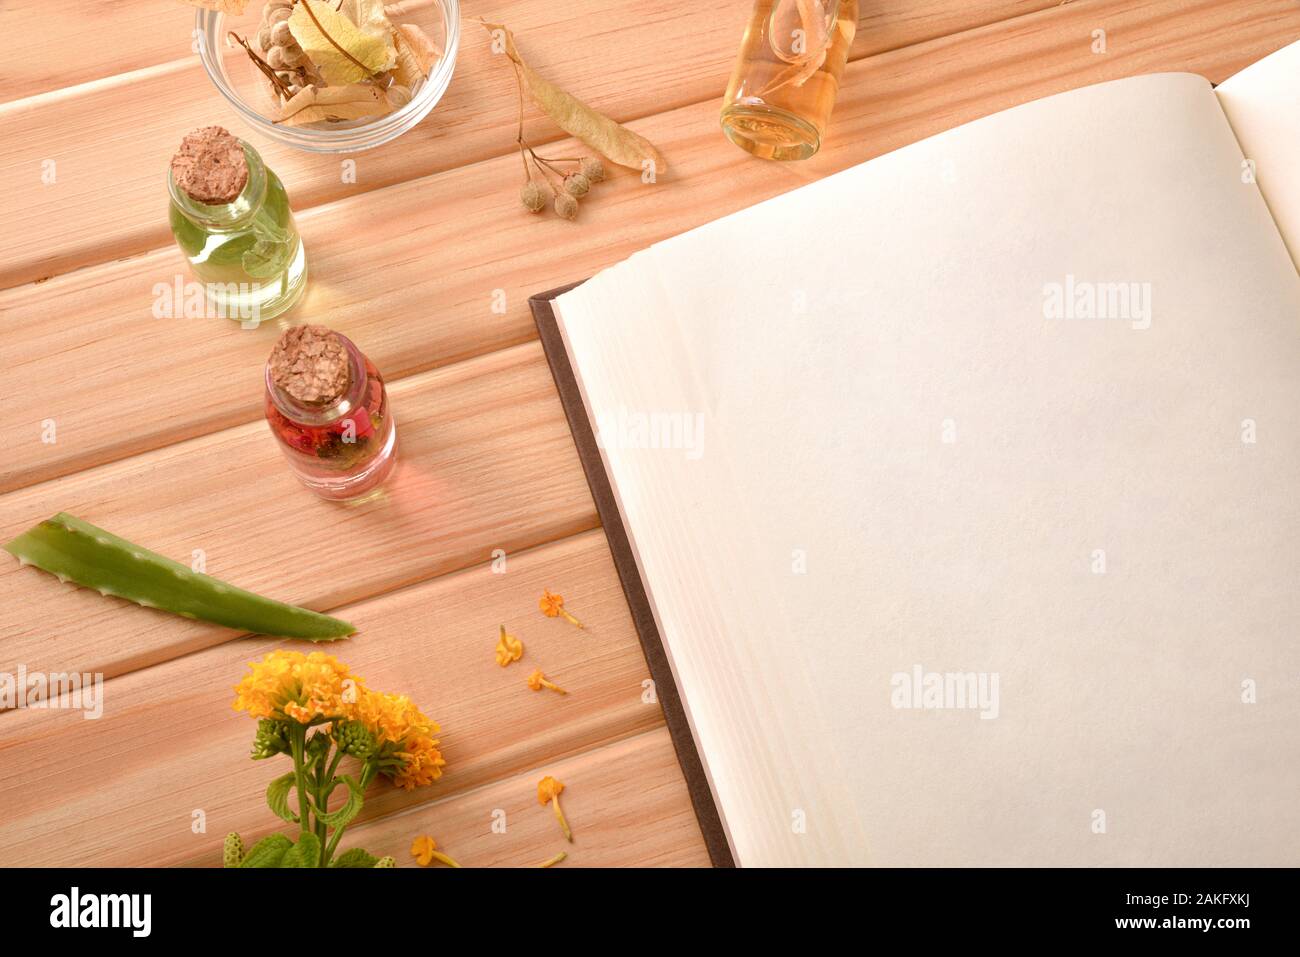 Blank book of recipes for the preparation of natural plant medicine on wooden table with medicinal and aromatic plants. Top view. Horizontal compositi Stock Photo